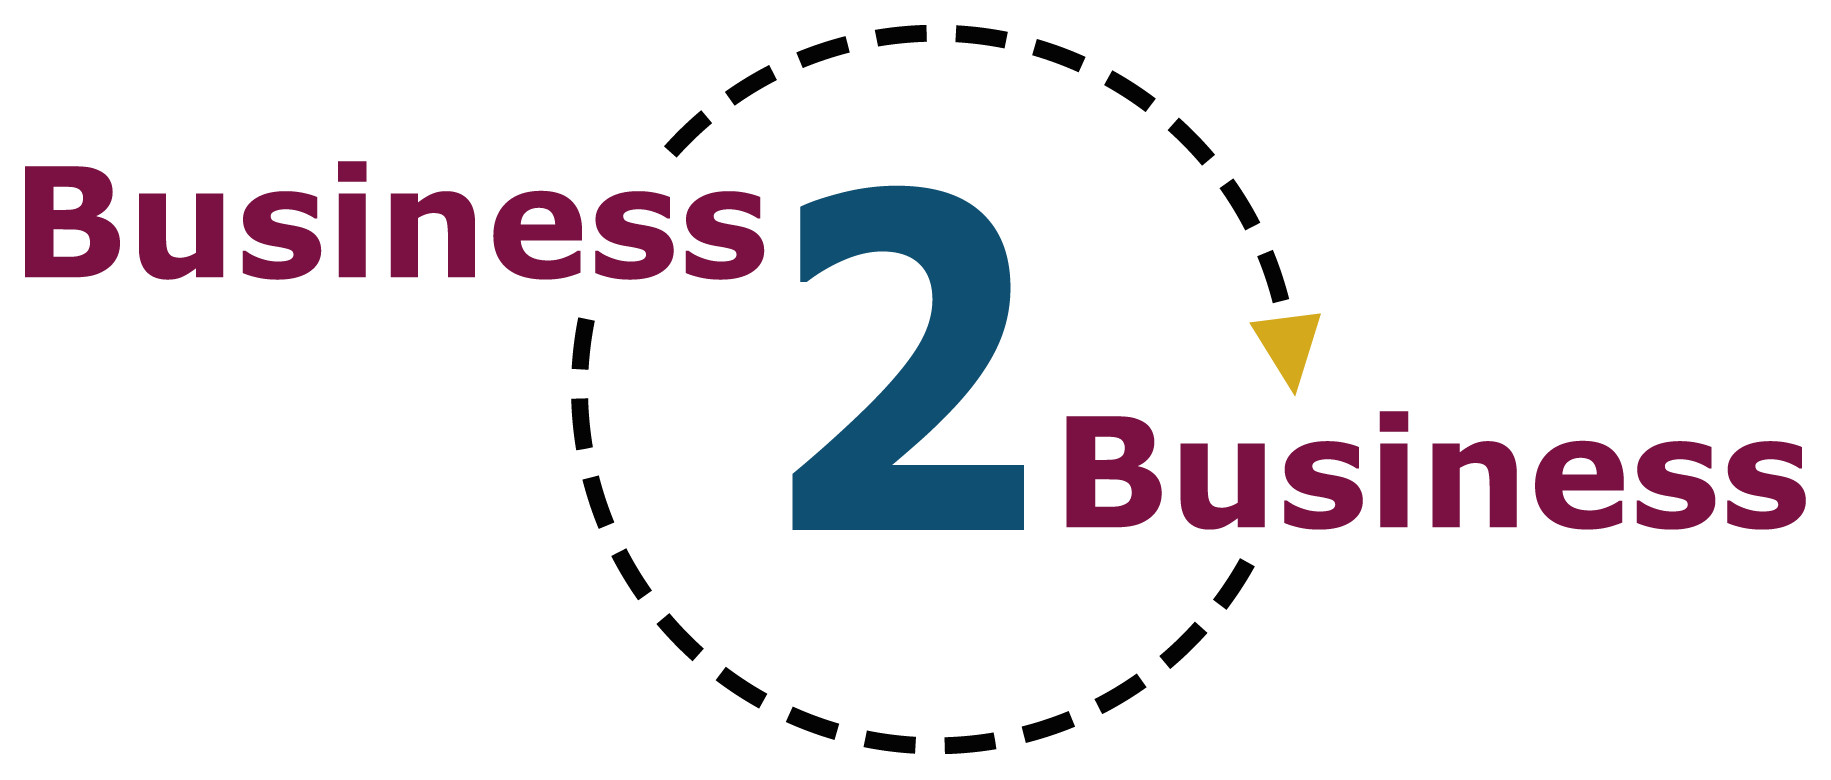 Business 2 Business - Dudley Multiply Programme